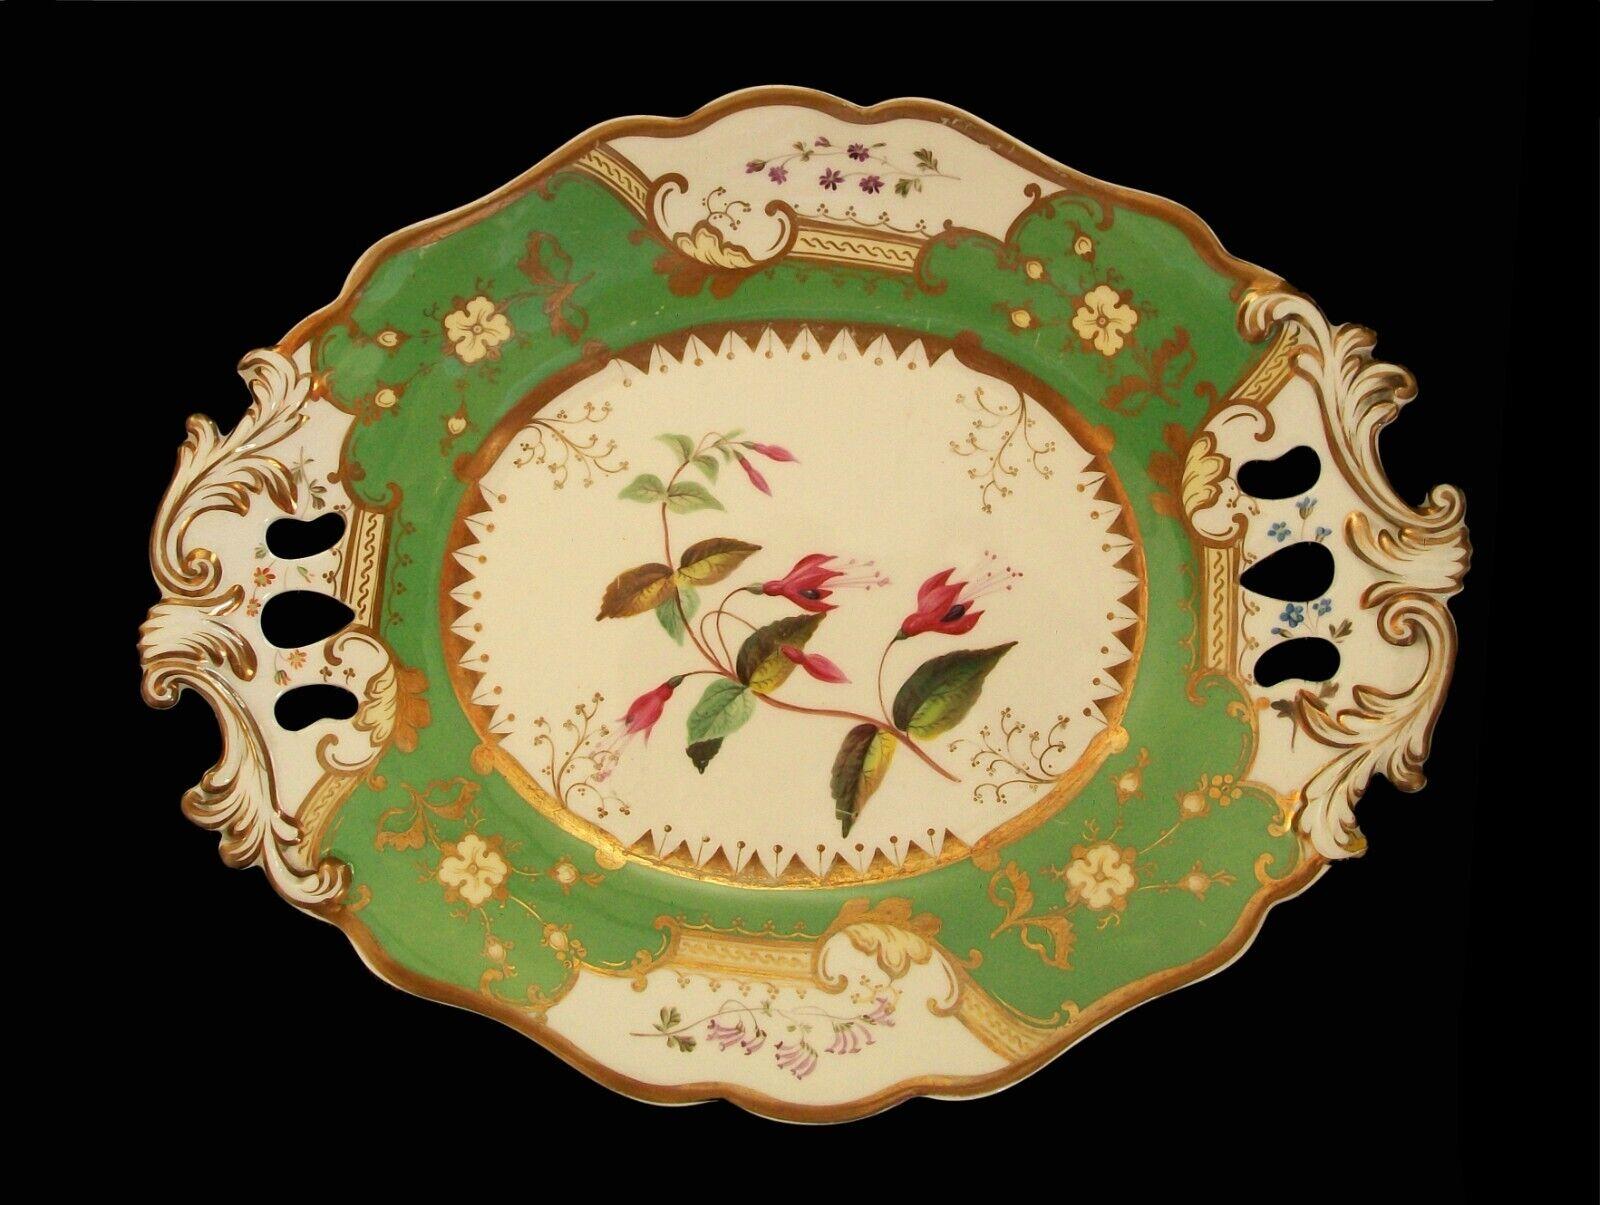 COALPORT (Attributed) - 'Fuchsia' - Antique ceramic twin handled botanical serving platter with apple green borders and gilded decoration - featuring a hand painted floral specimen to the center - no pattern number - unsigned - United Kingdom -